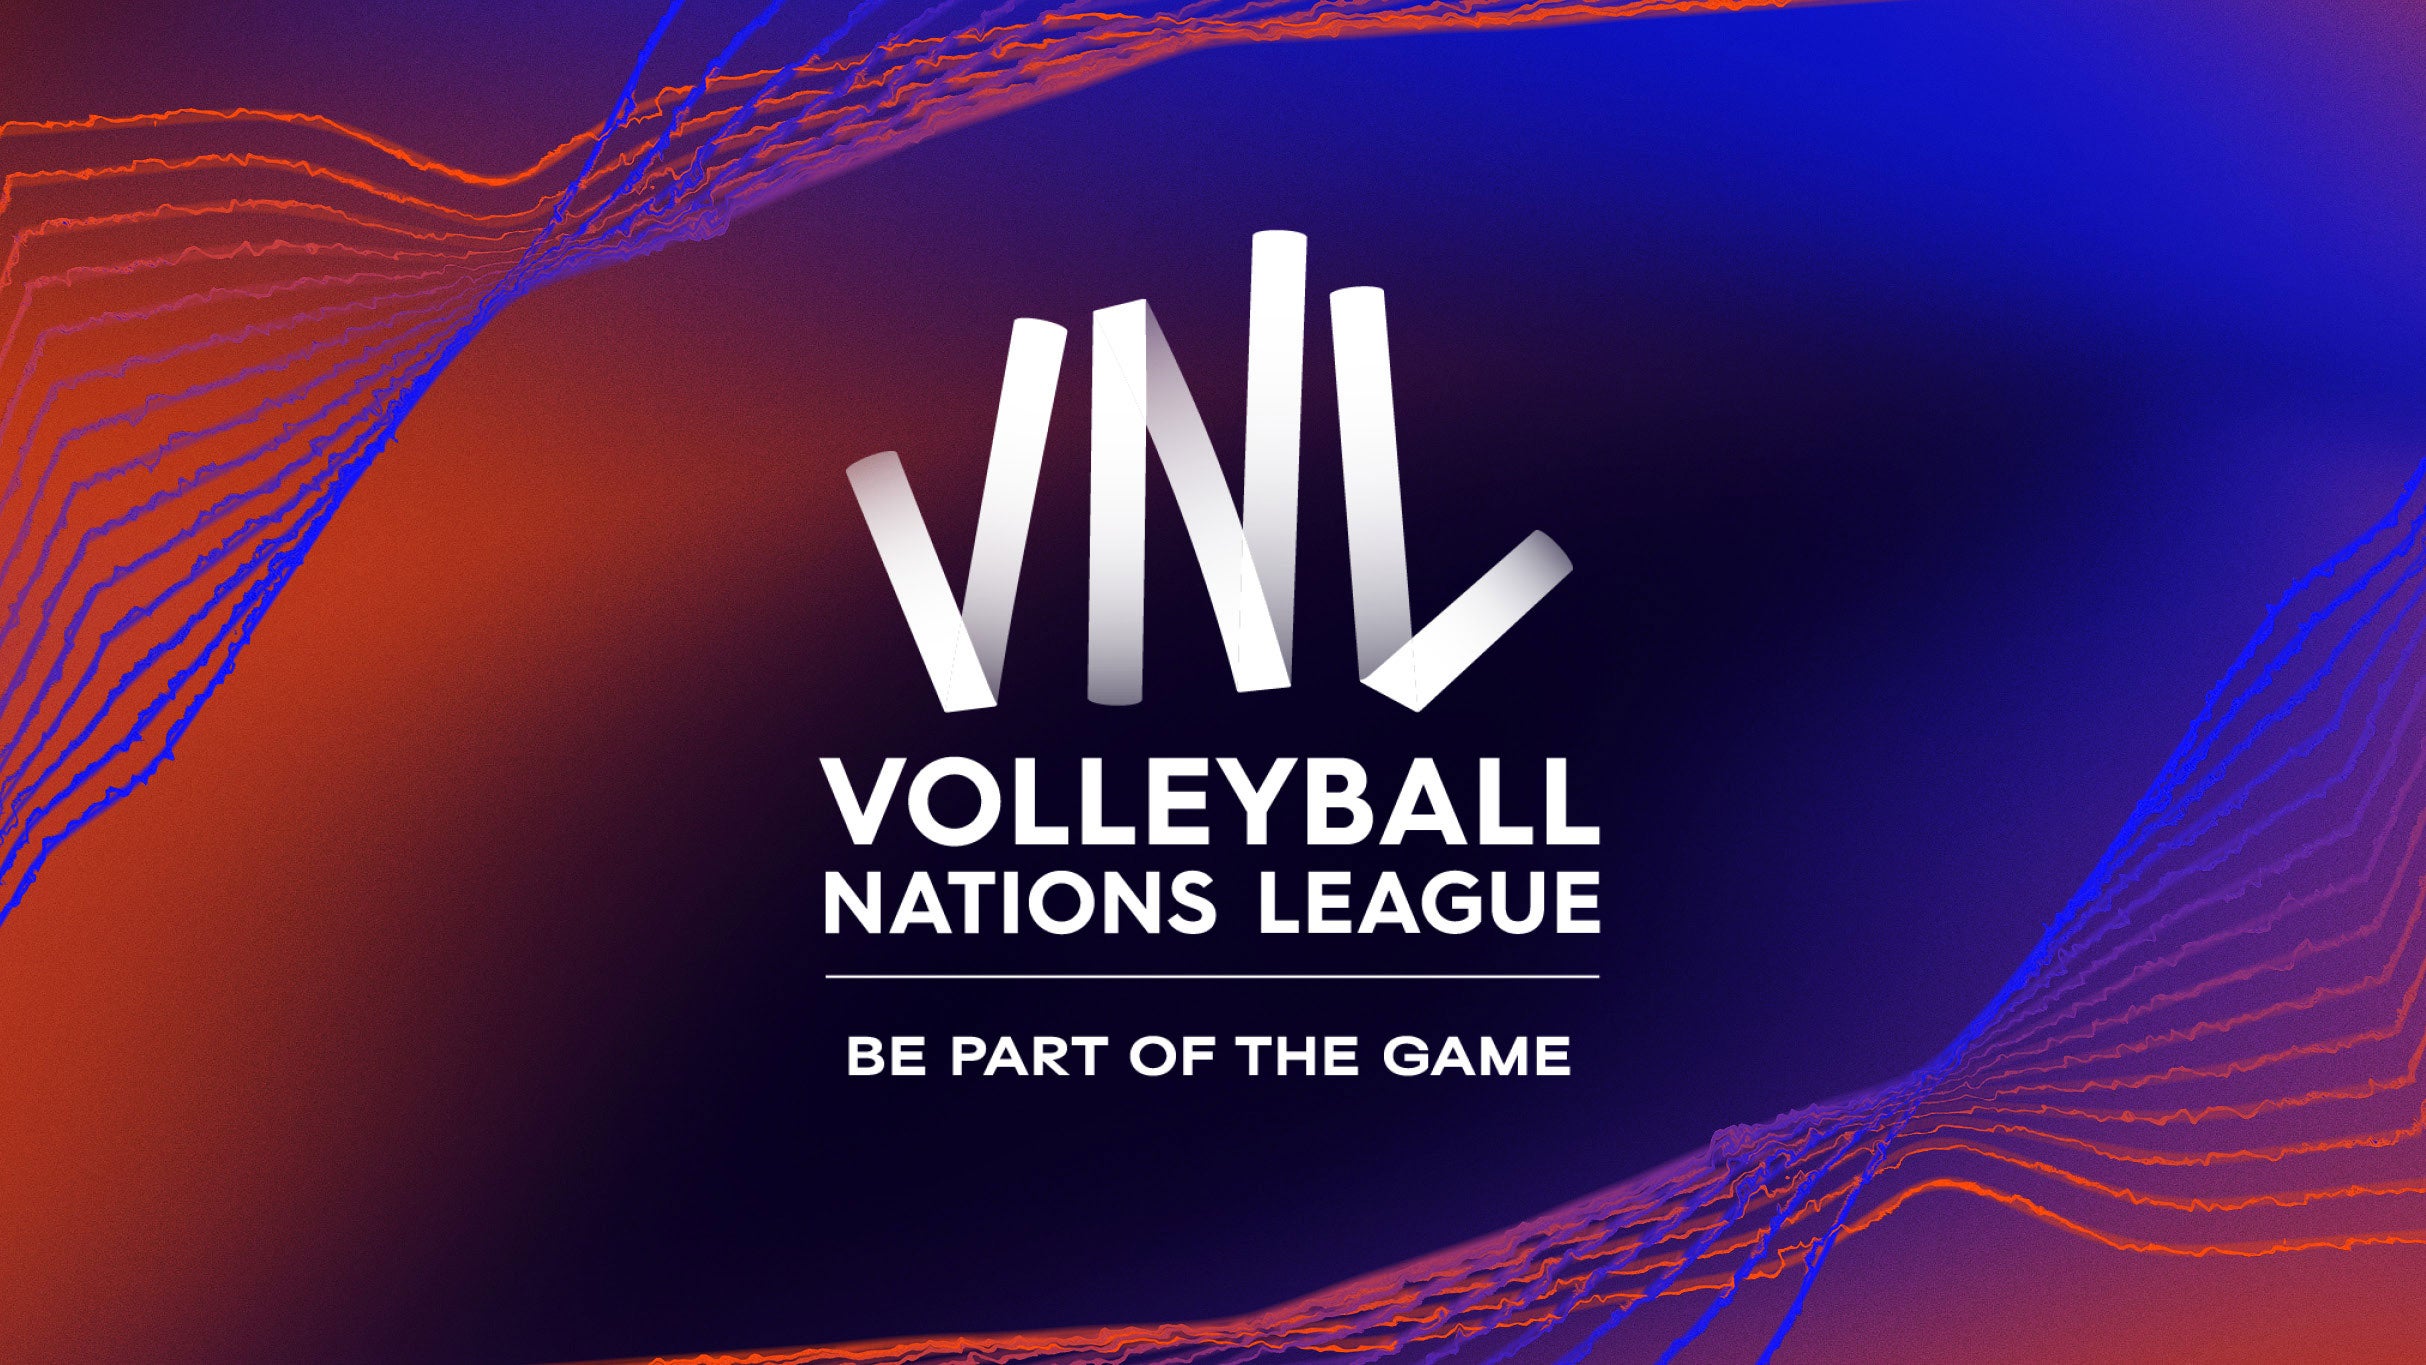 Volleyball Nations League - Match Day 4 in Ottawa promo photo for TD Place Insider presale offer code